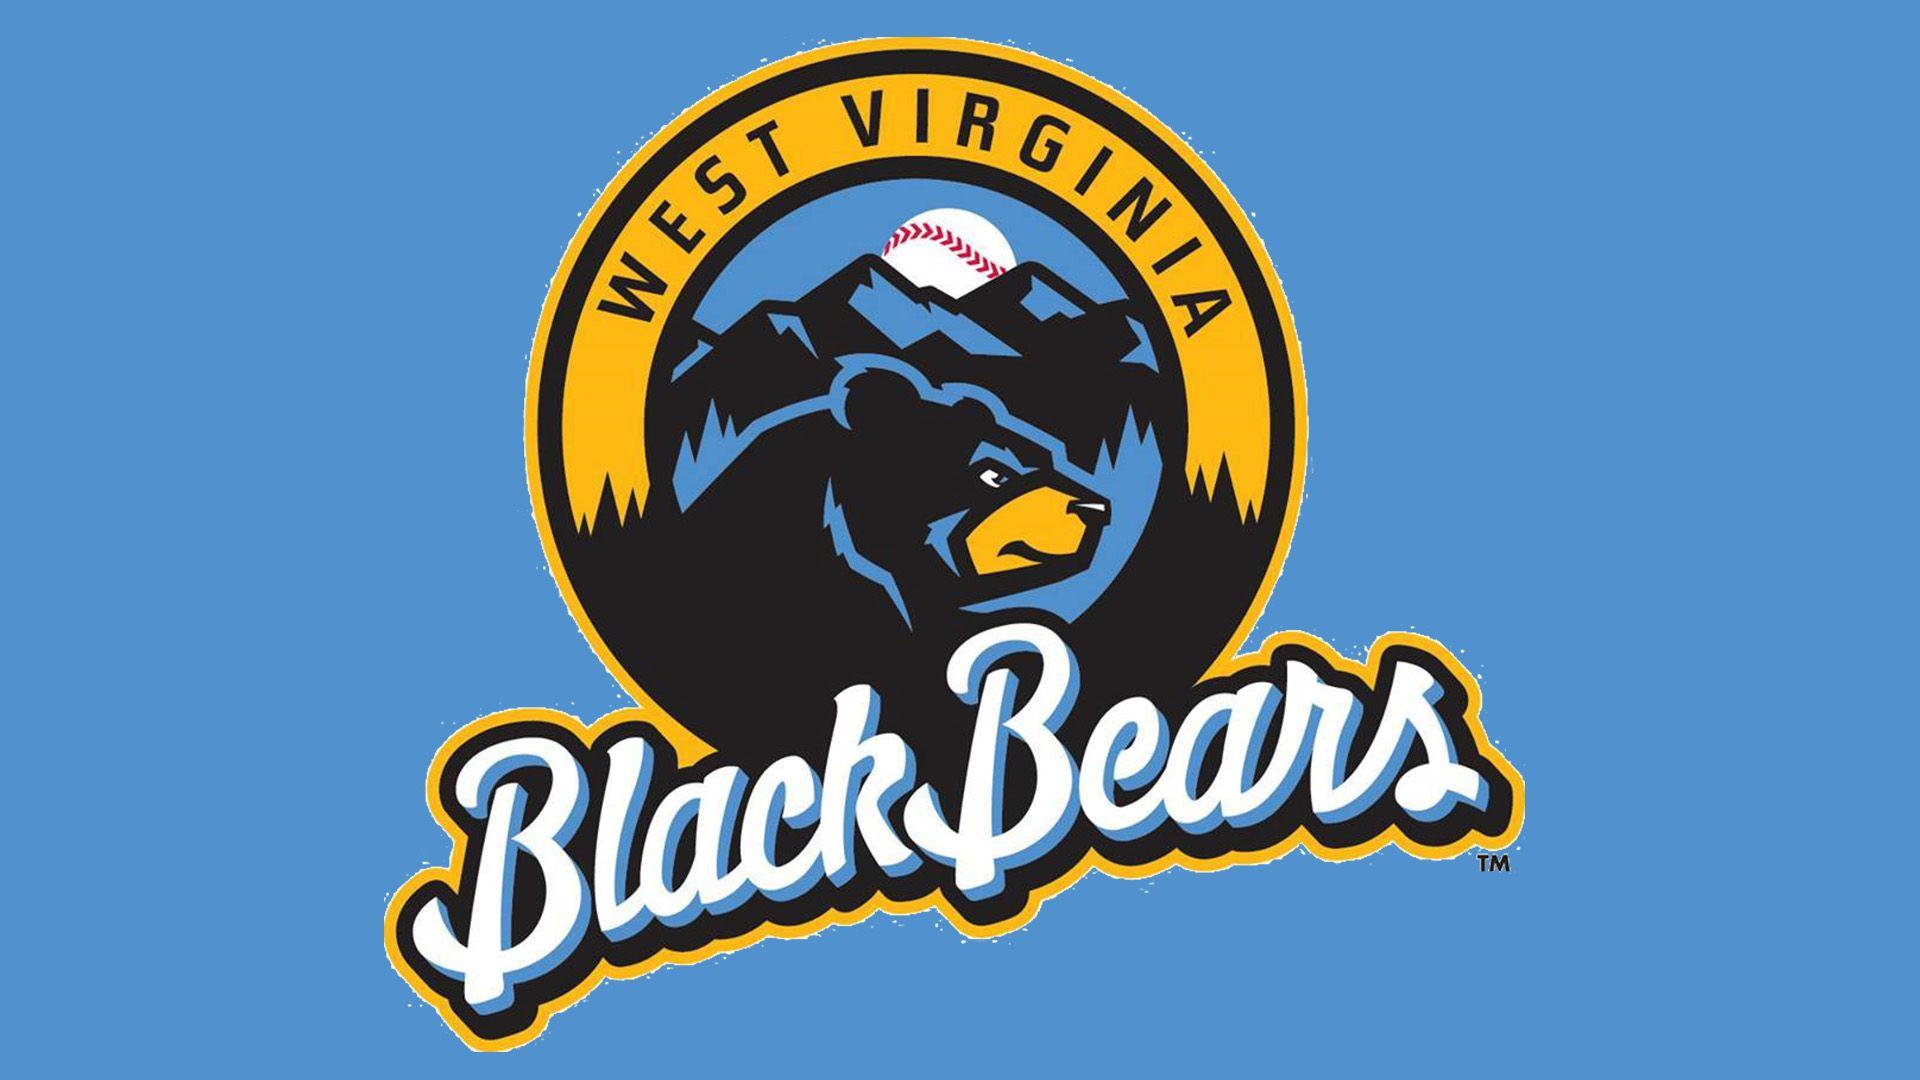 Red and Black Bears Logo - West Virginia Black Bears logo, symbol, meaning, History and Evolution